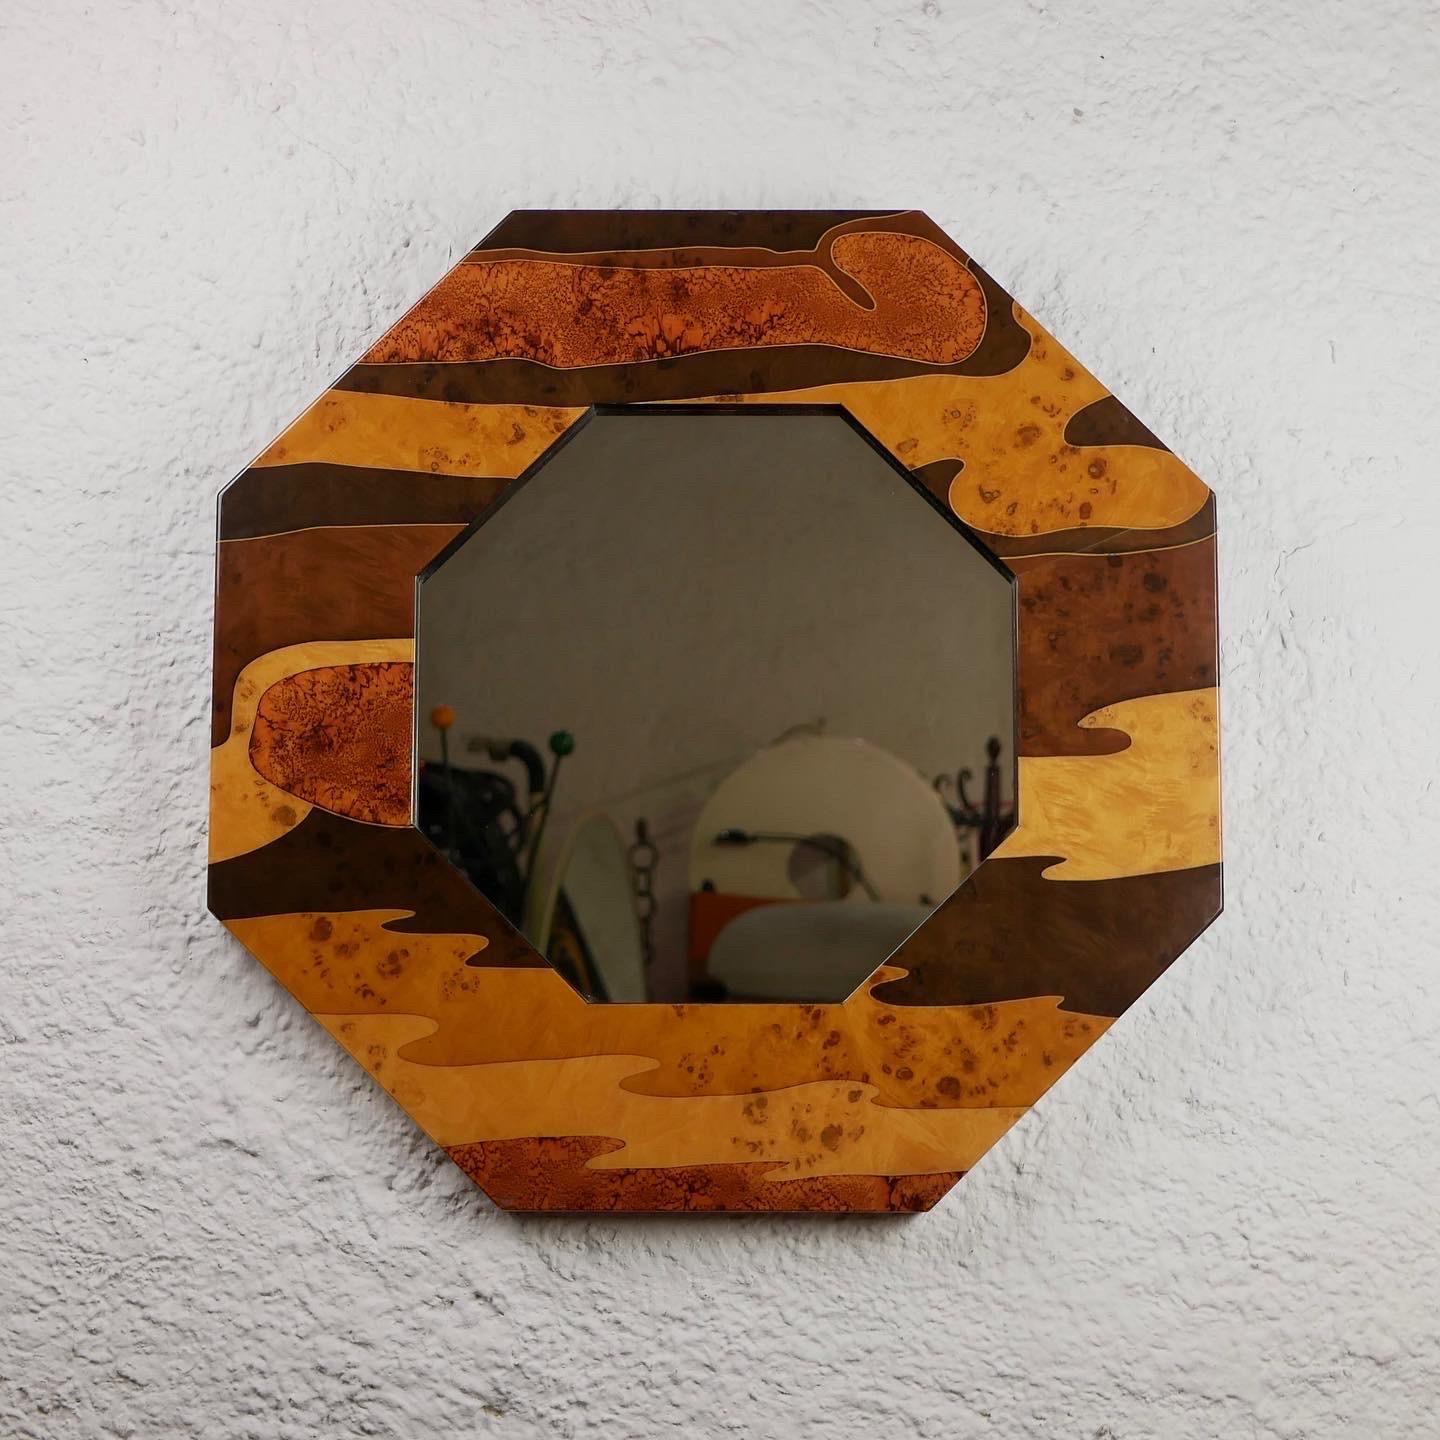 Beautiful and rare octogonal mirror by Jean-Claude Mahey for Romeo, made in France in the 1970s.
Made in wood marquetry, lacquered. 
Very good condition.